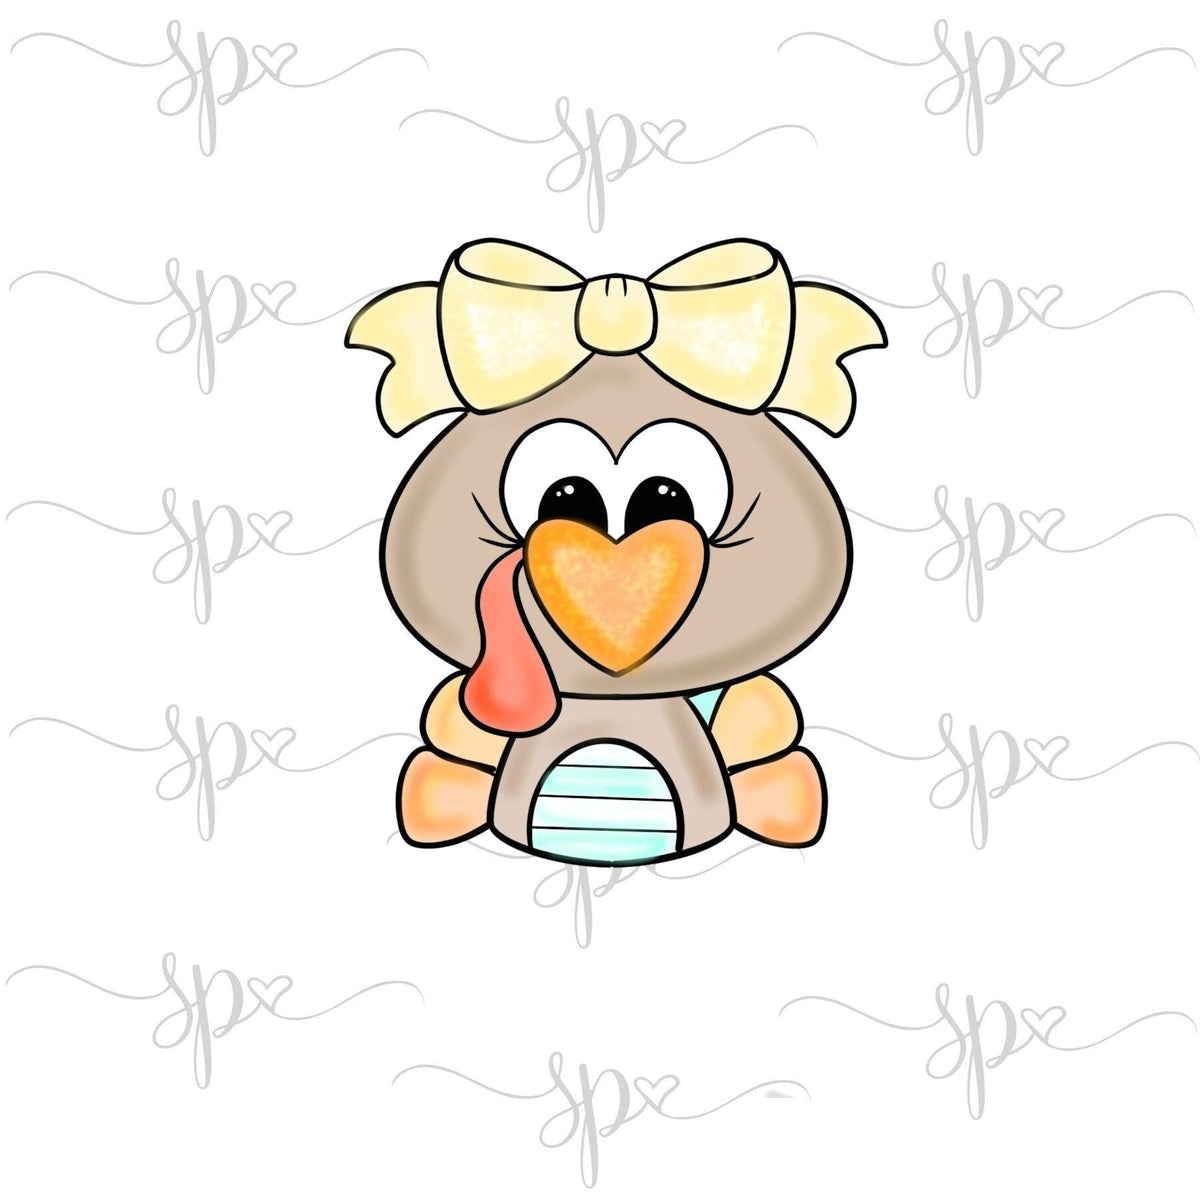 Girly Droopy Turkey Body Cookie Cutter - Sweetleigh 